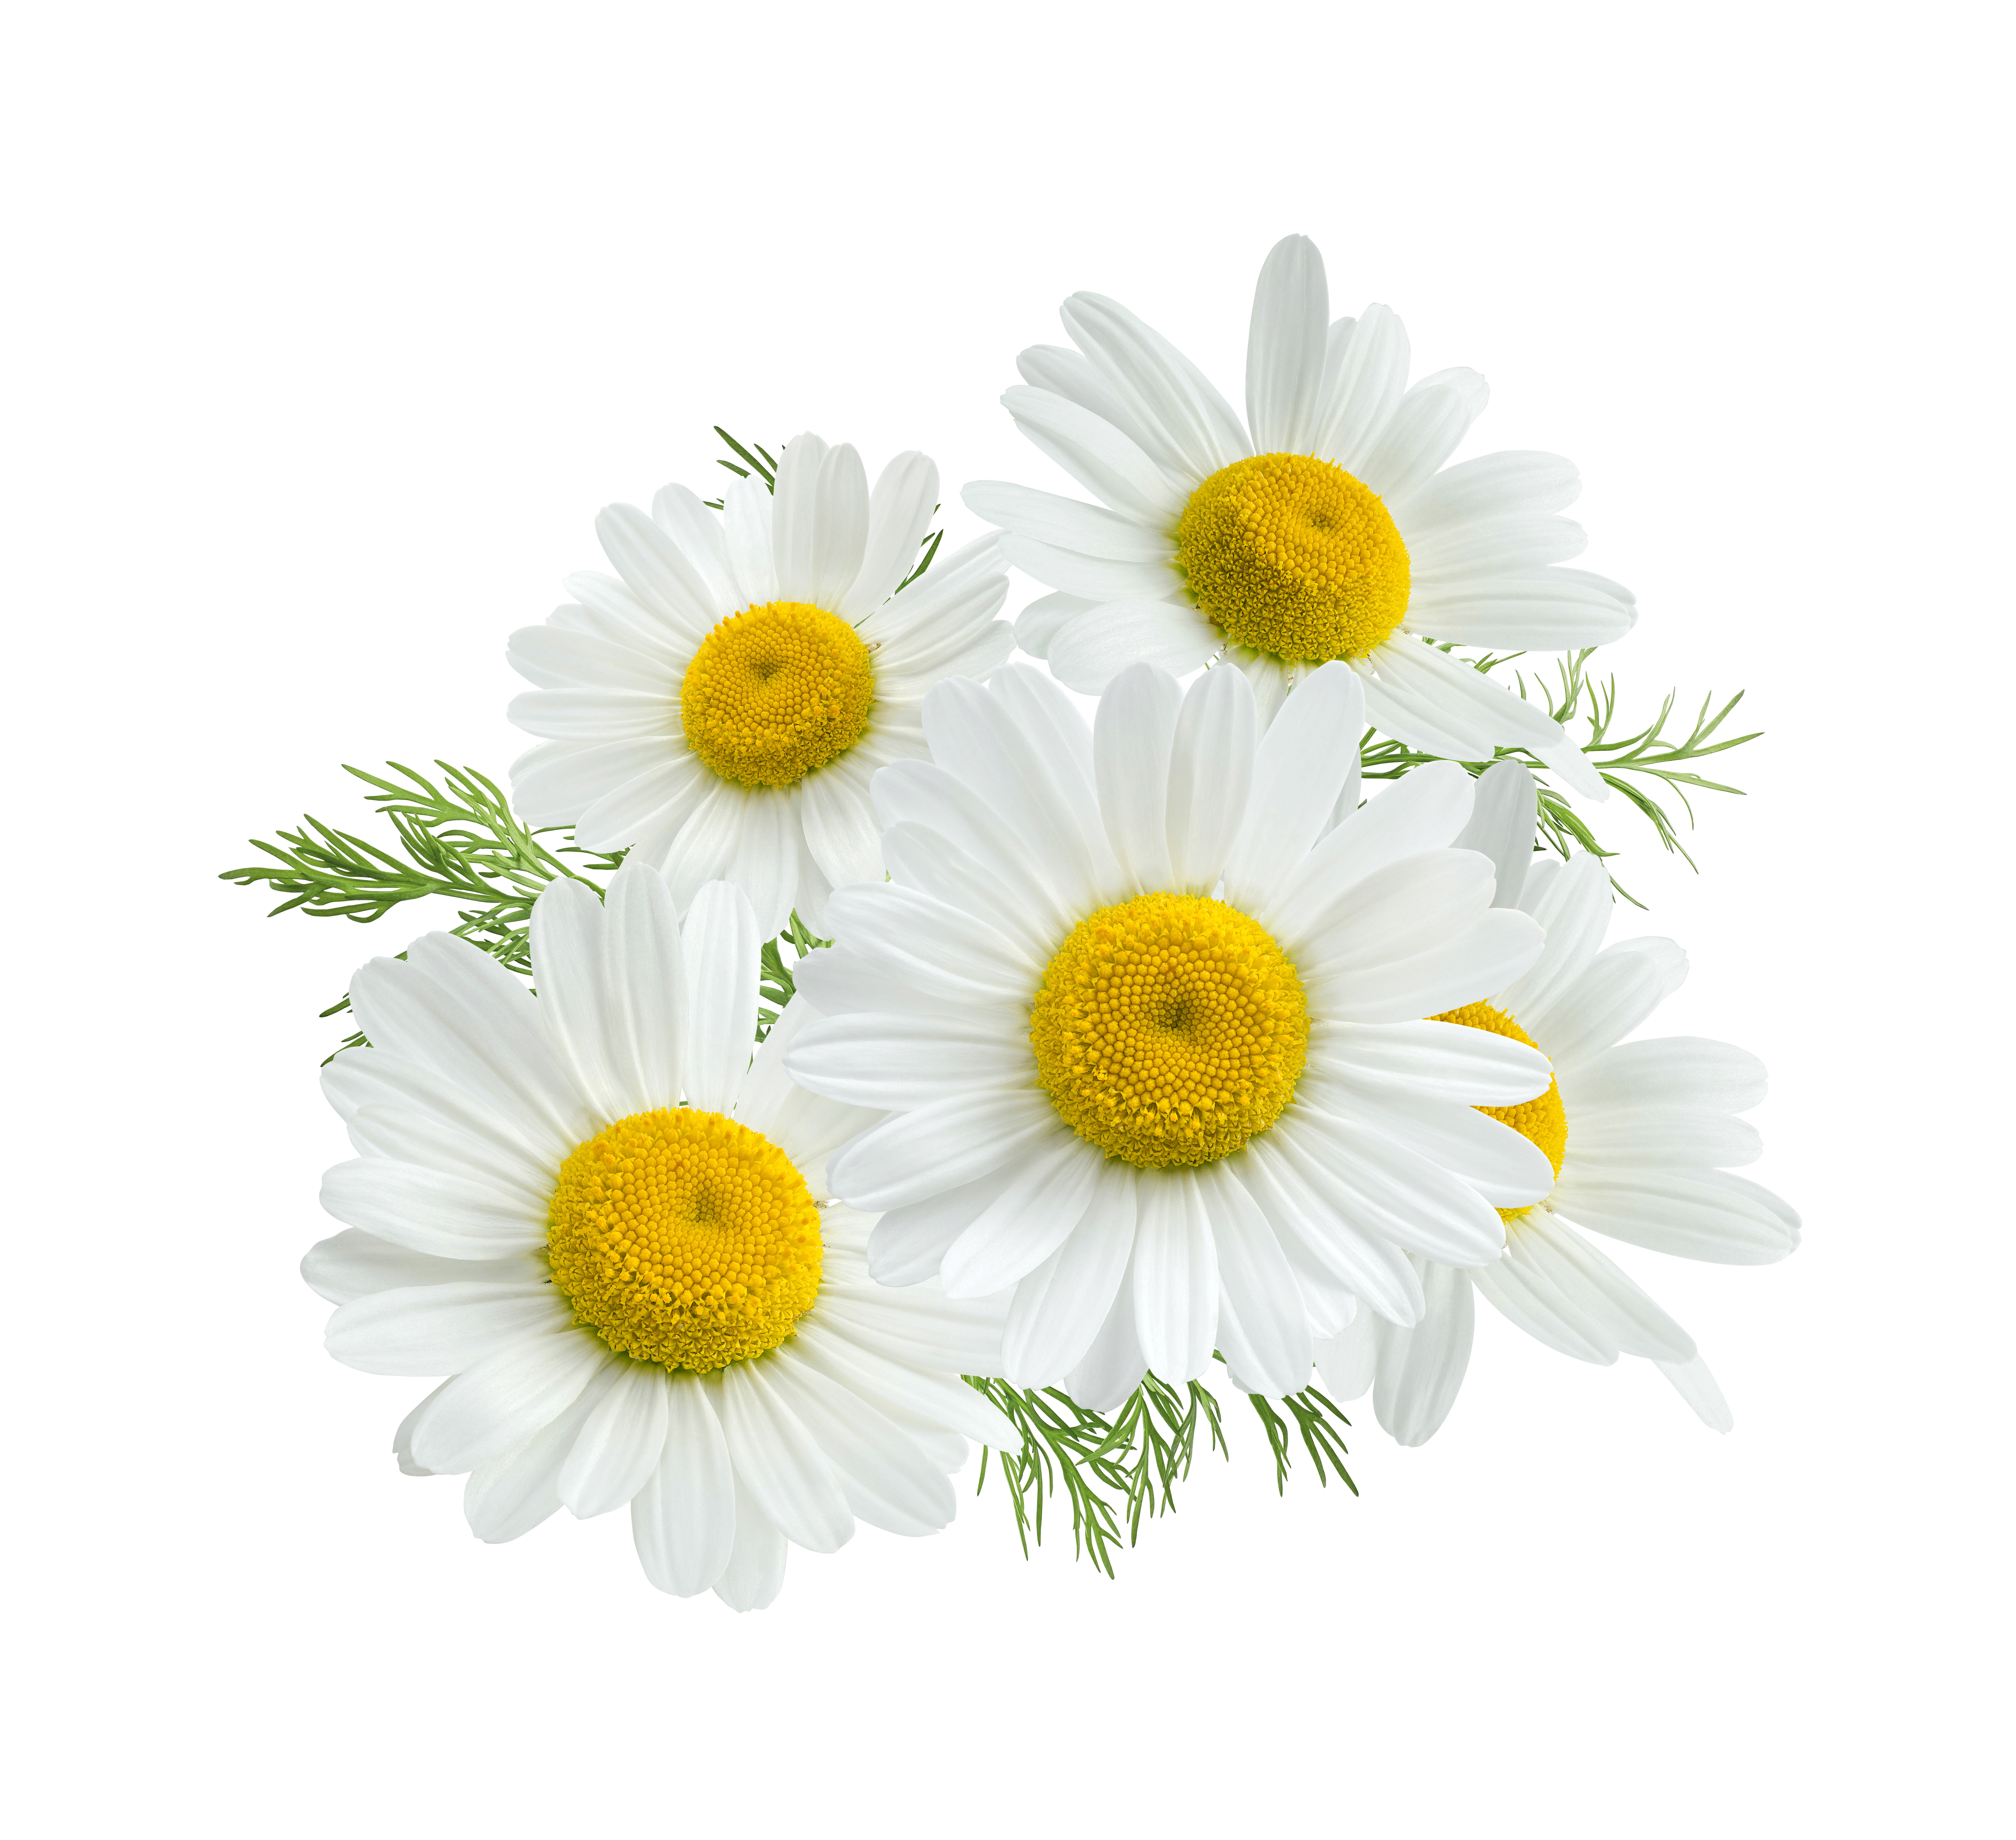 . Hdpng.com Chamomile.png Hdpng.com  - Chamomile, Transparent background PNG HD thumbnail